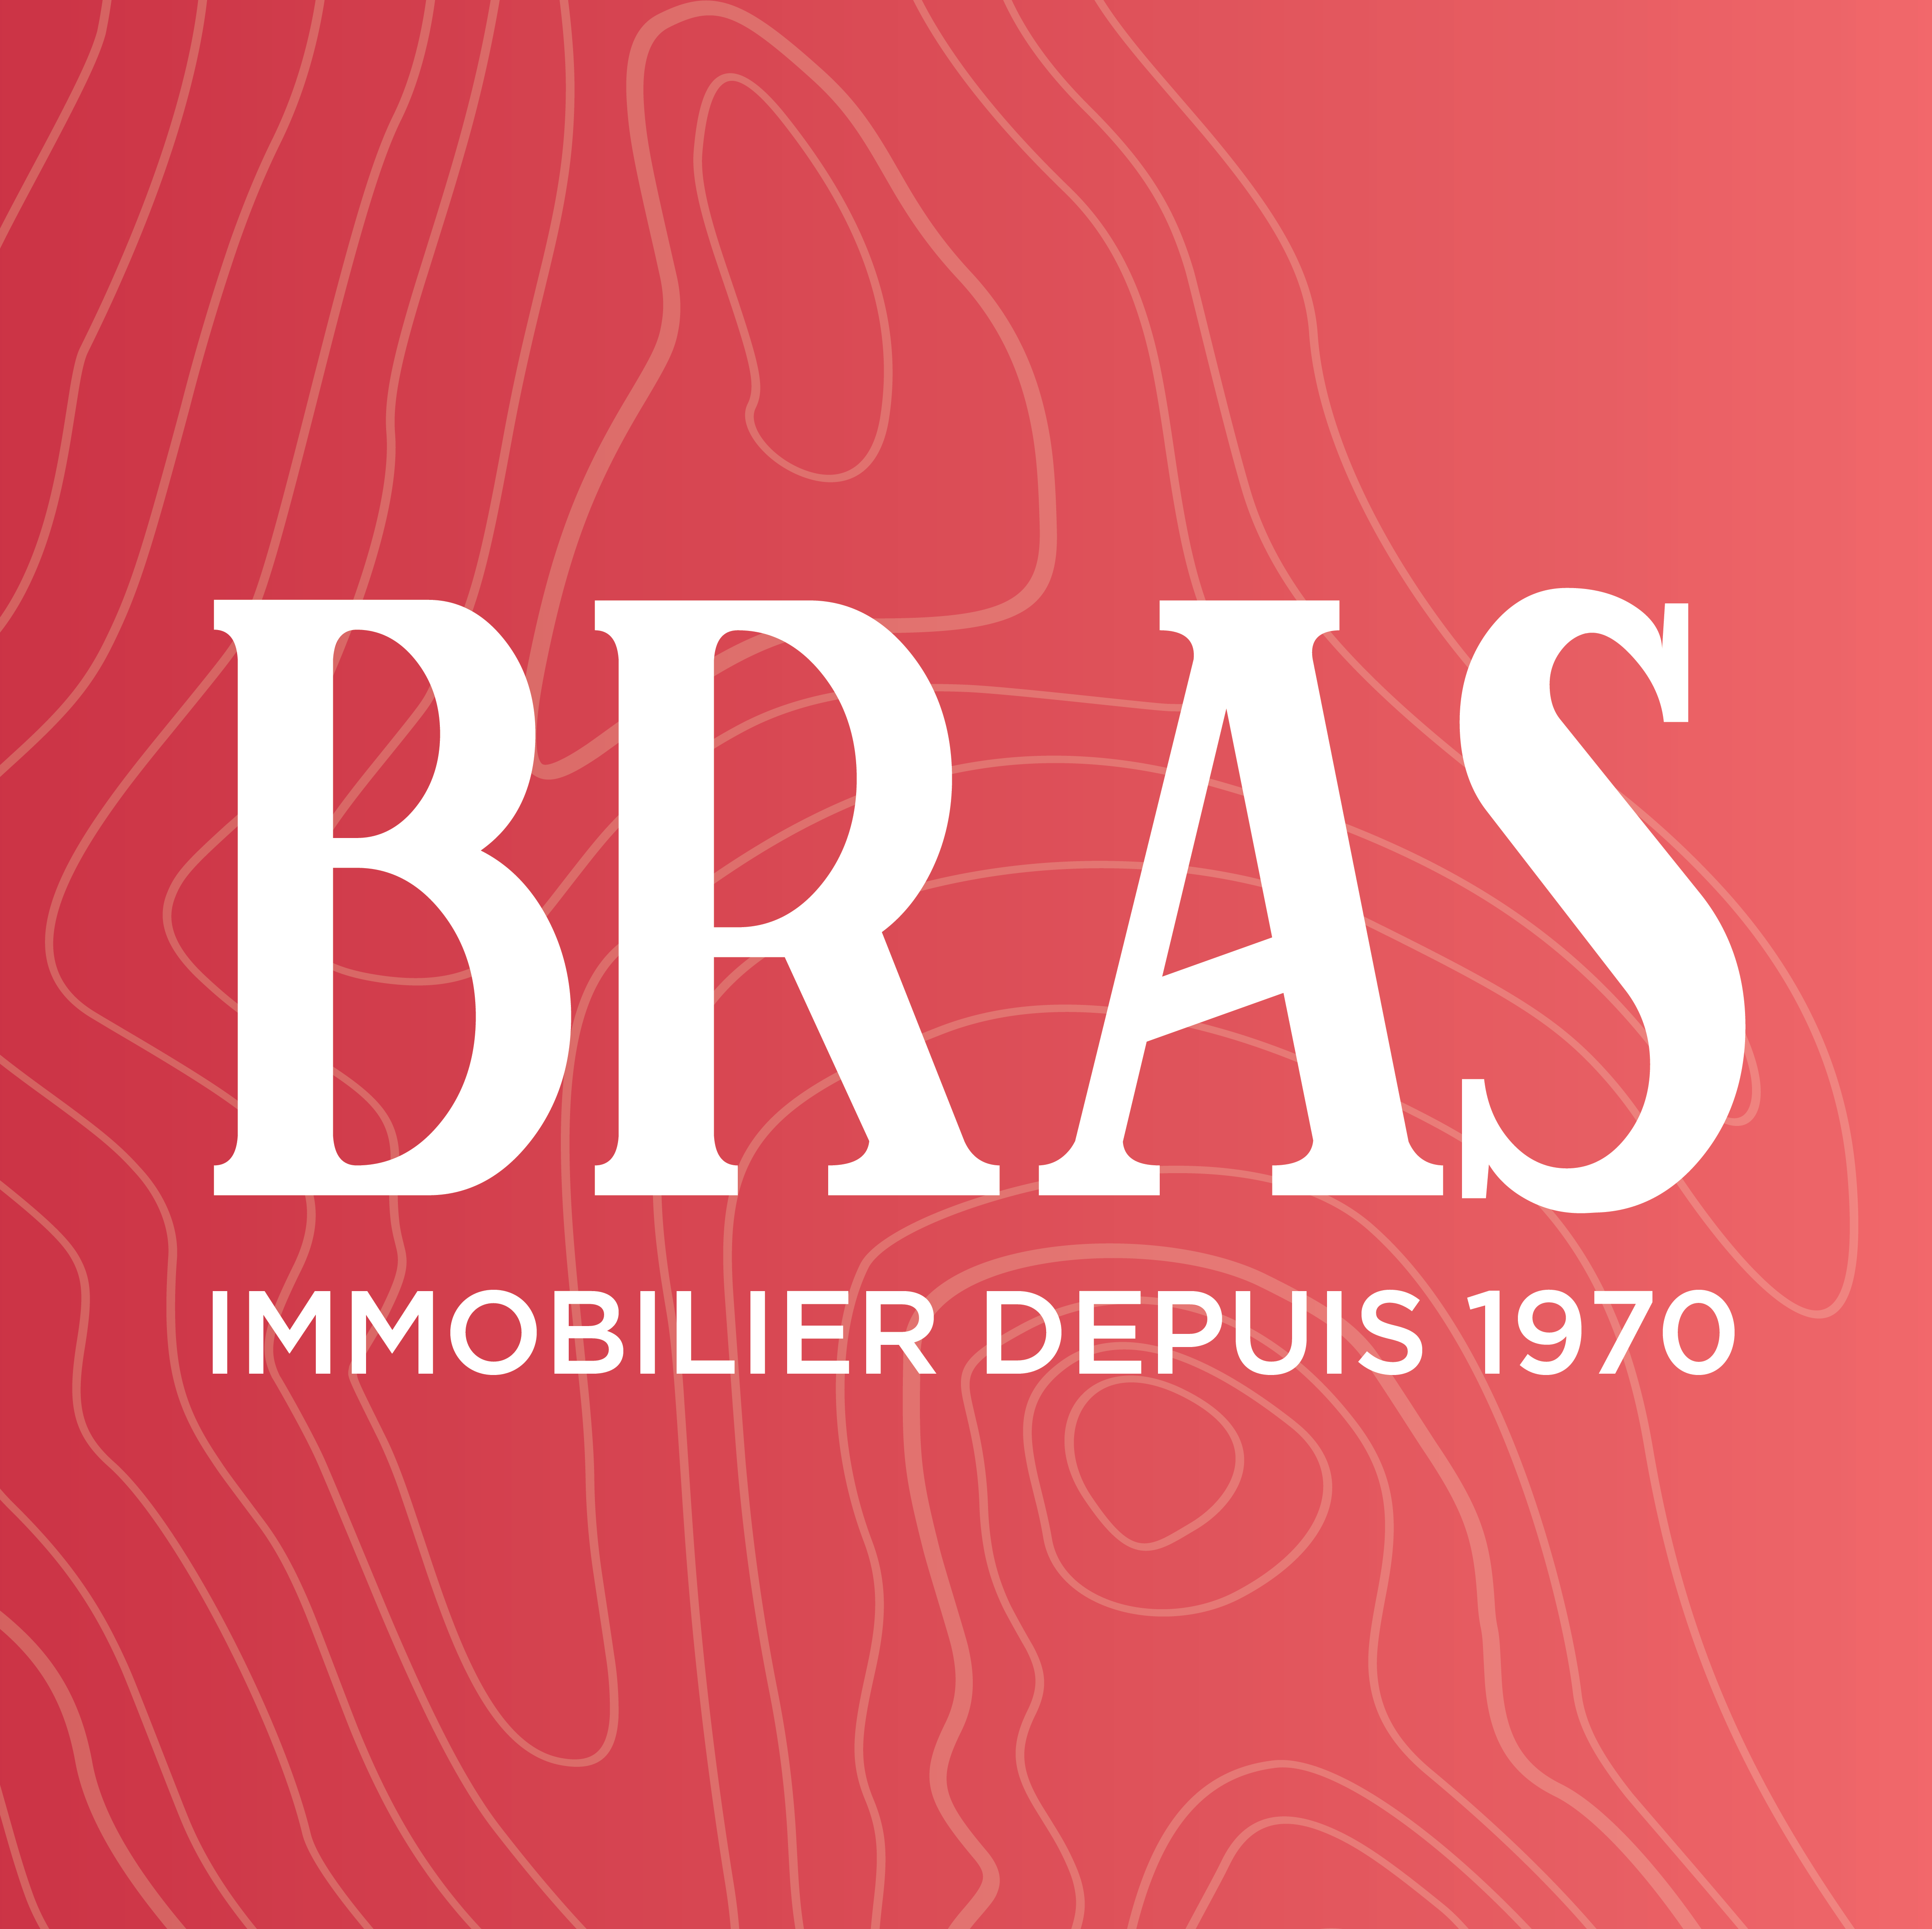 Bras immobilier